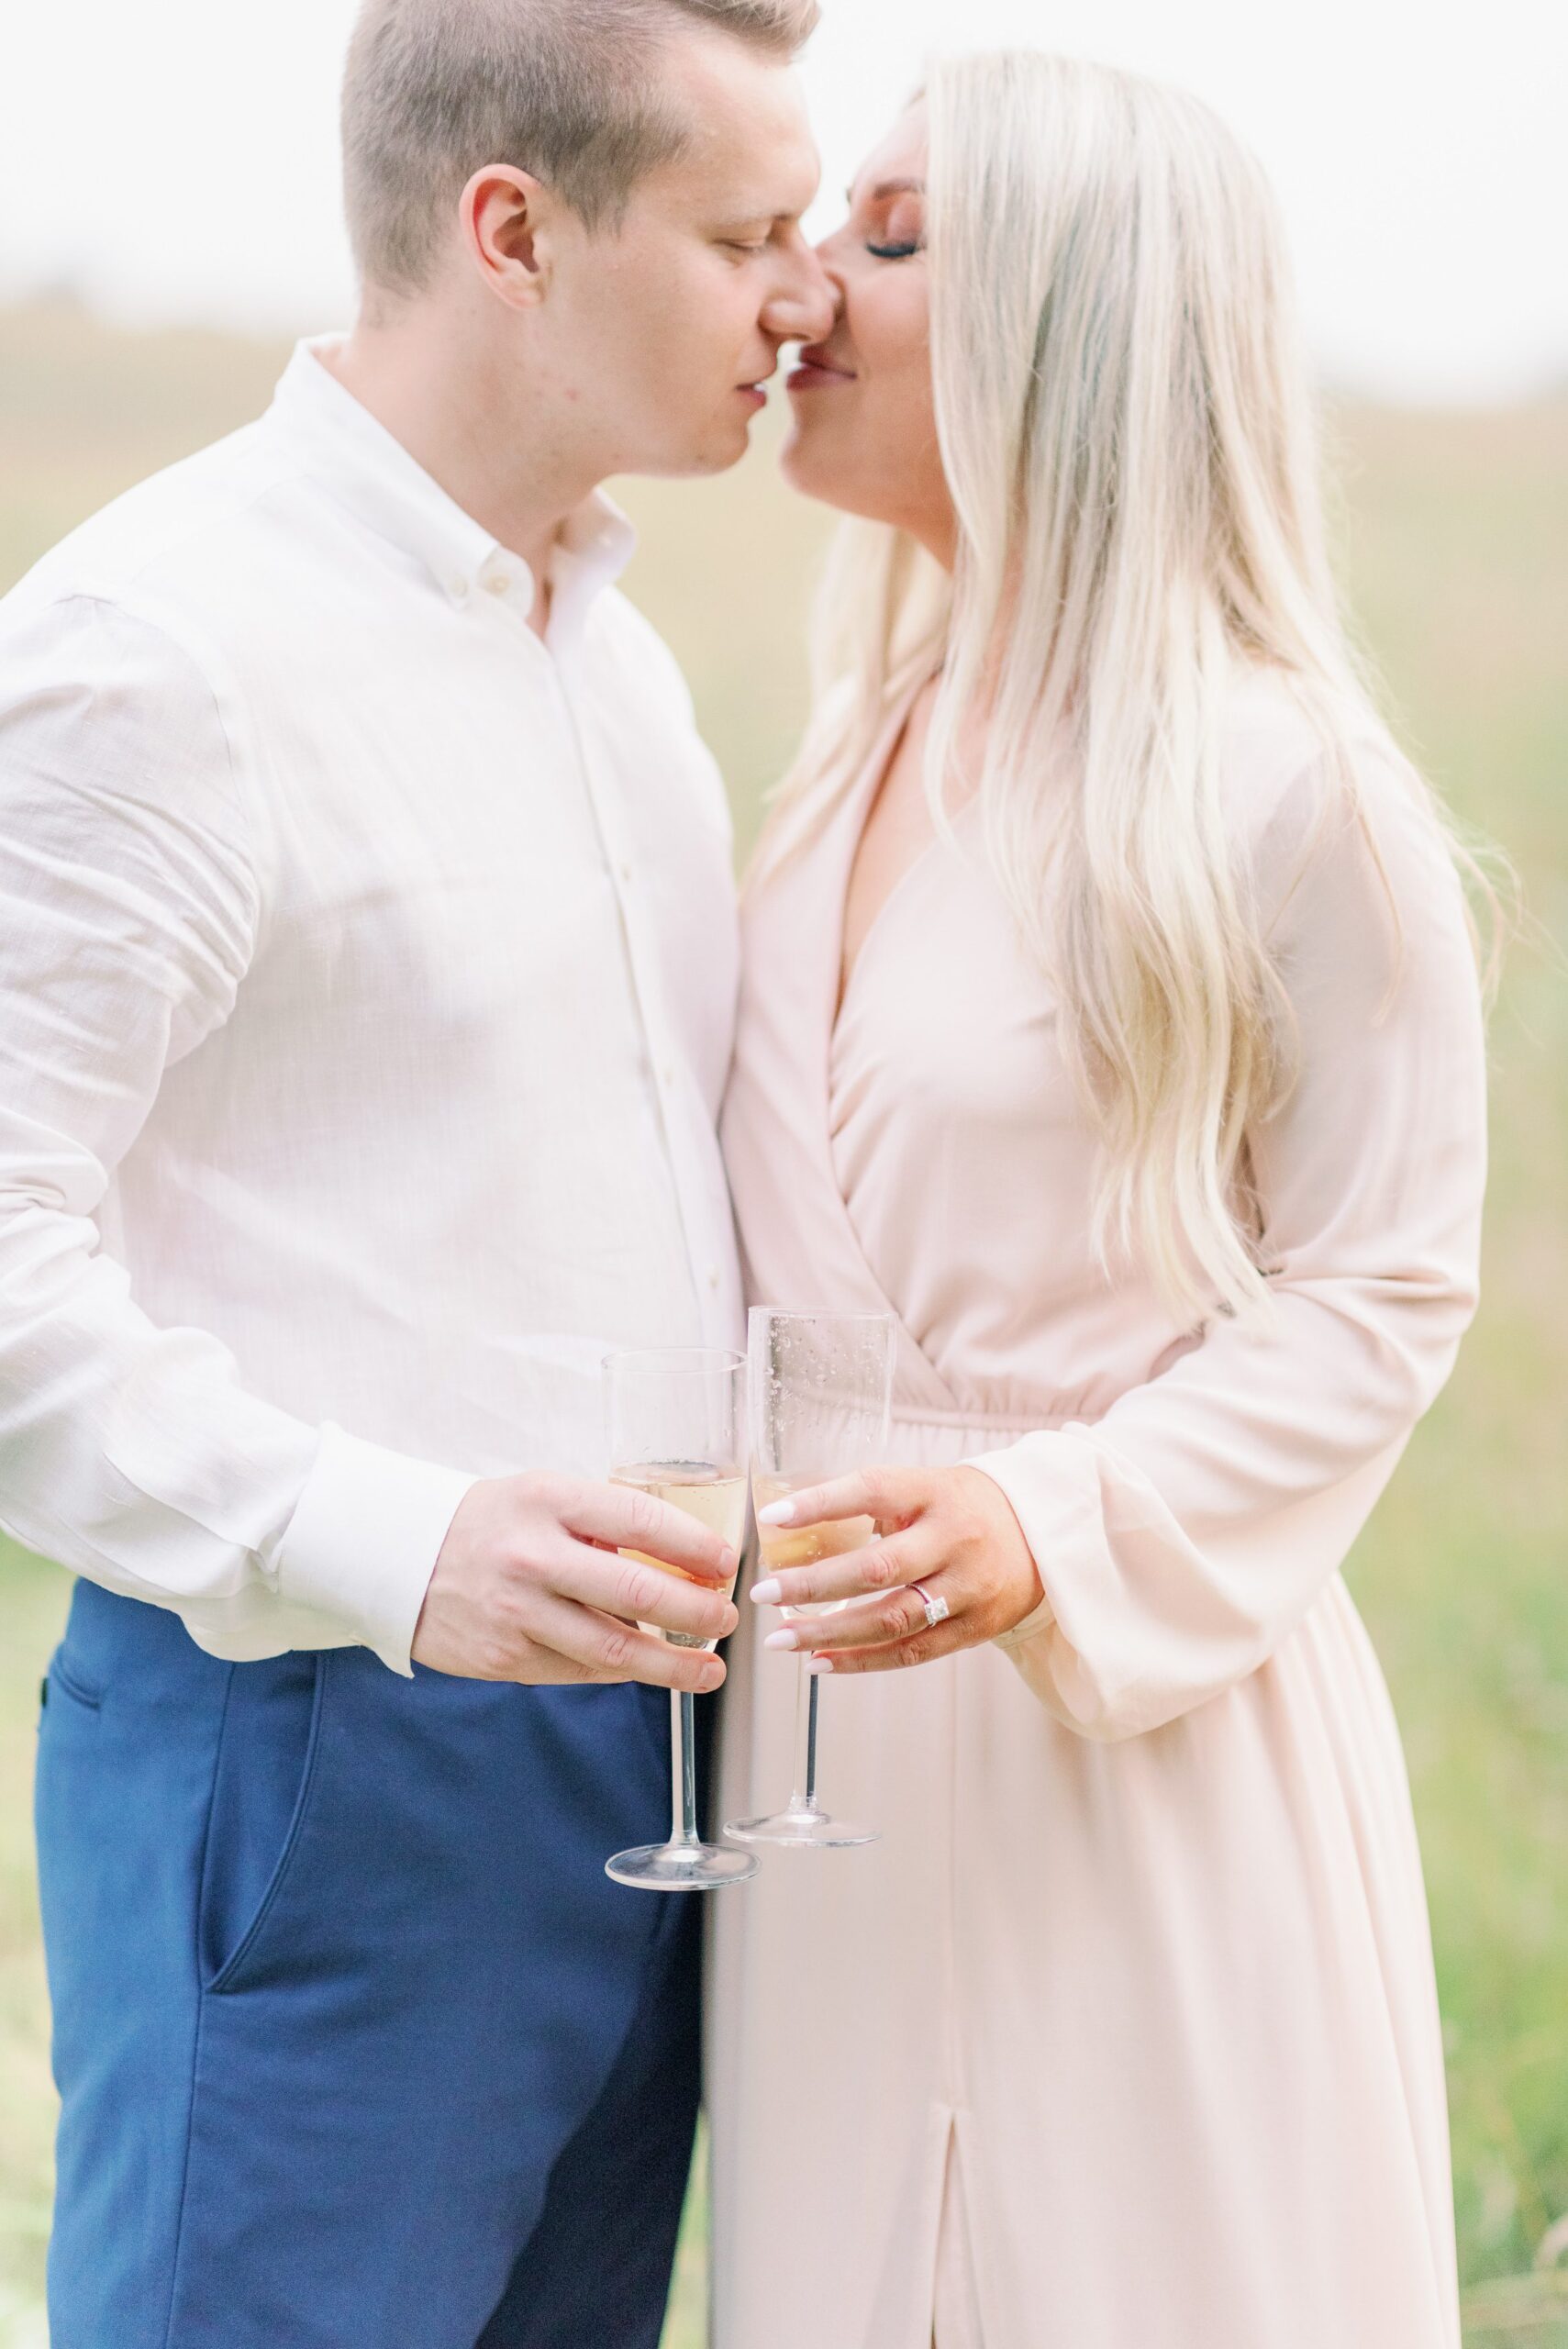 Bride and groom almost kissing while holding champagne